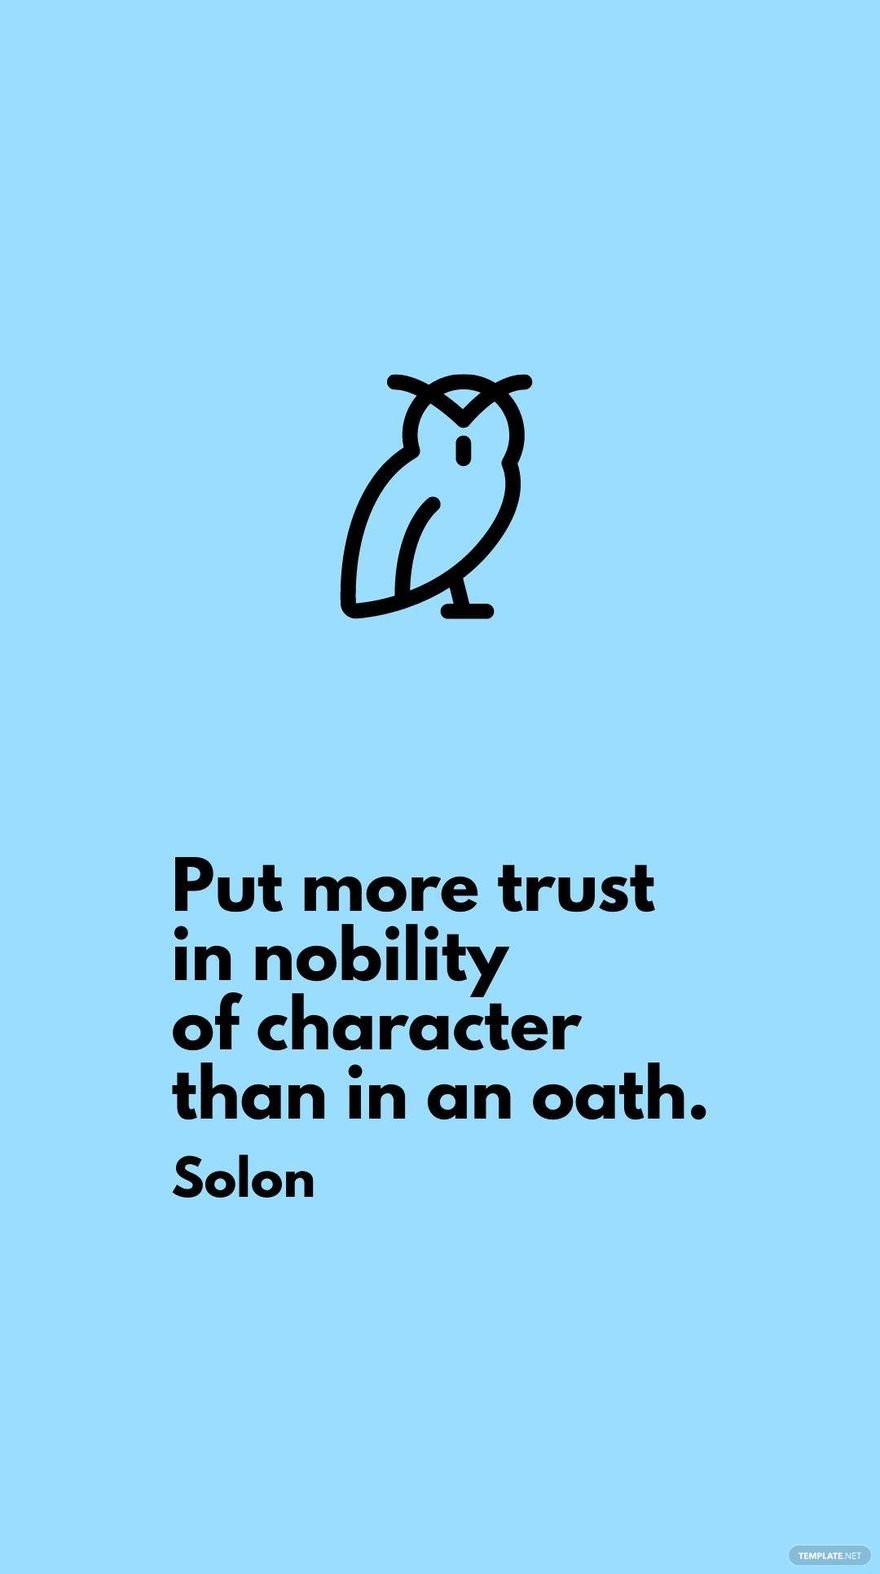 Solon - Put more trust in nobility of character than in an oath. in JPG